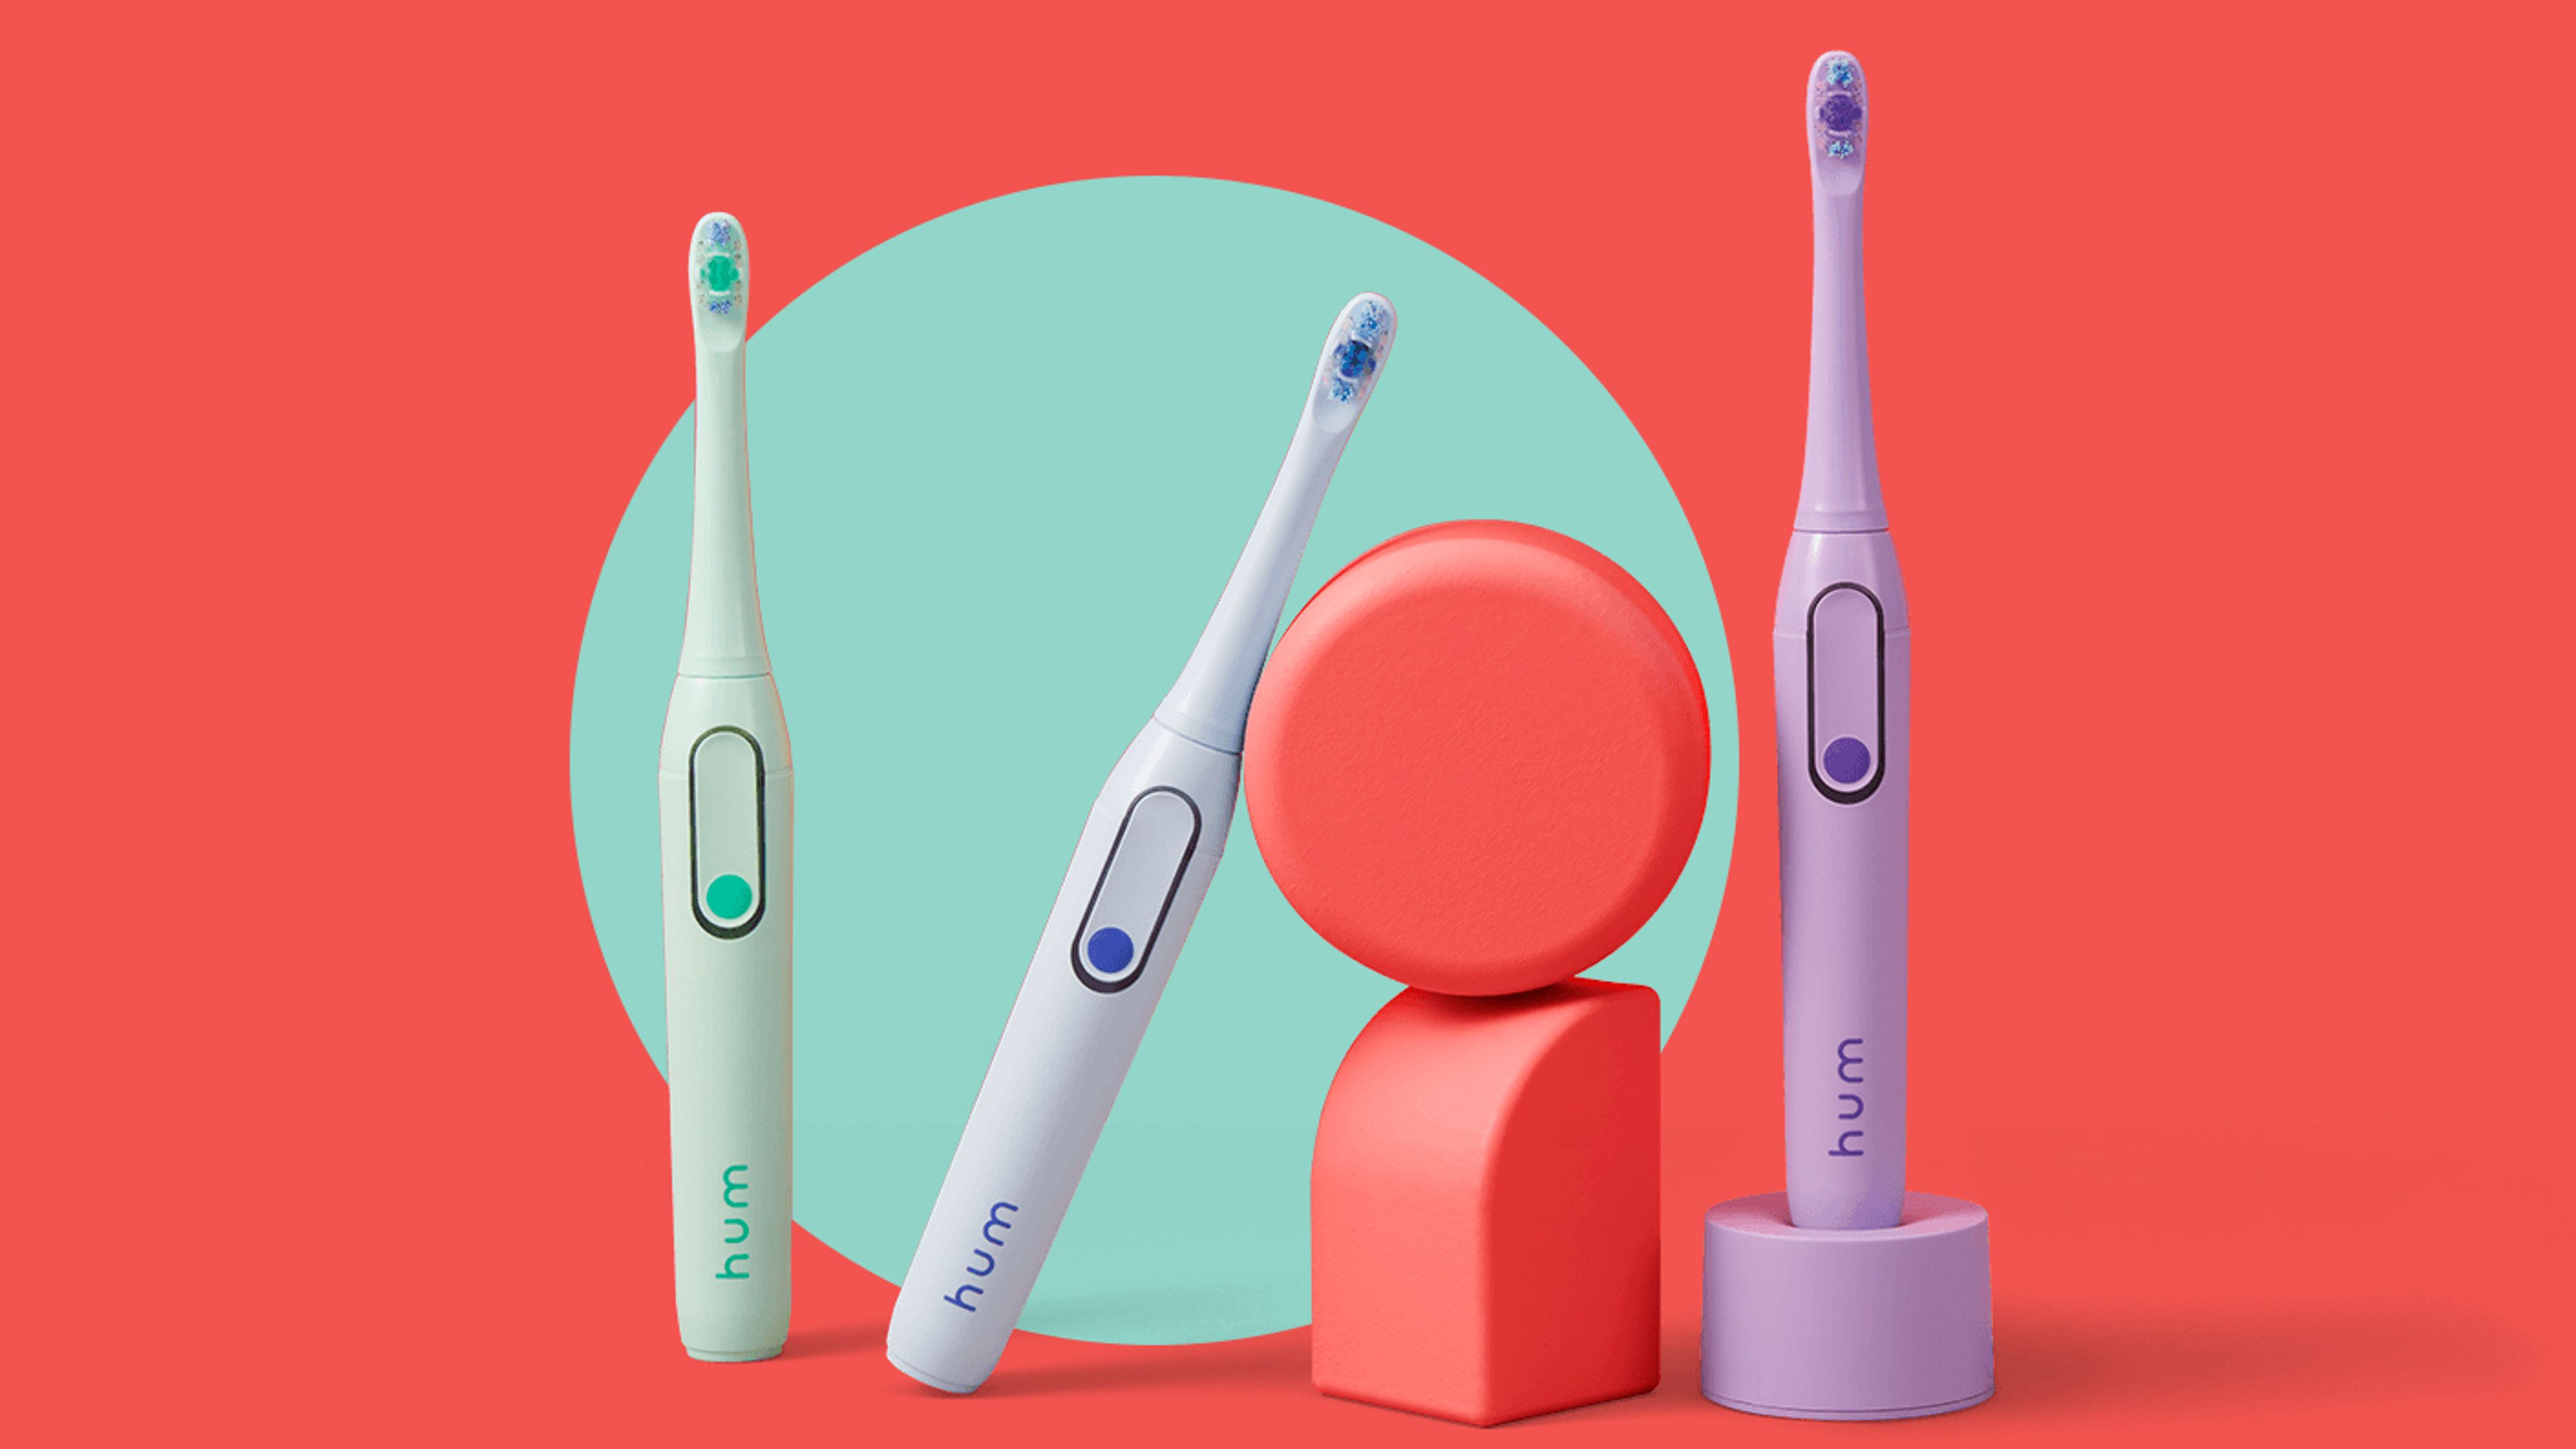 Partnering with Colgate to change the way the world brushes